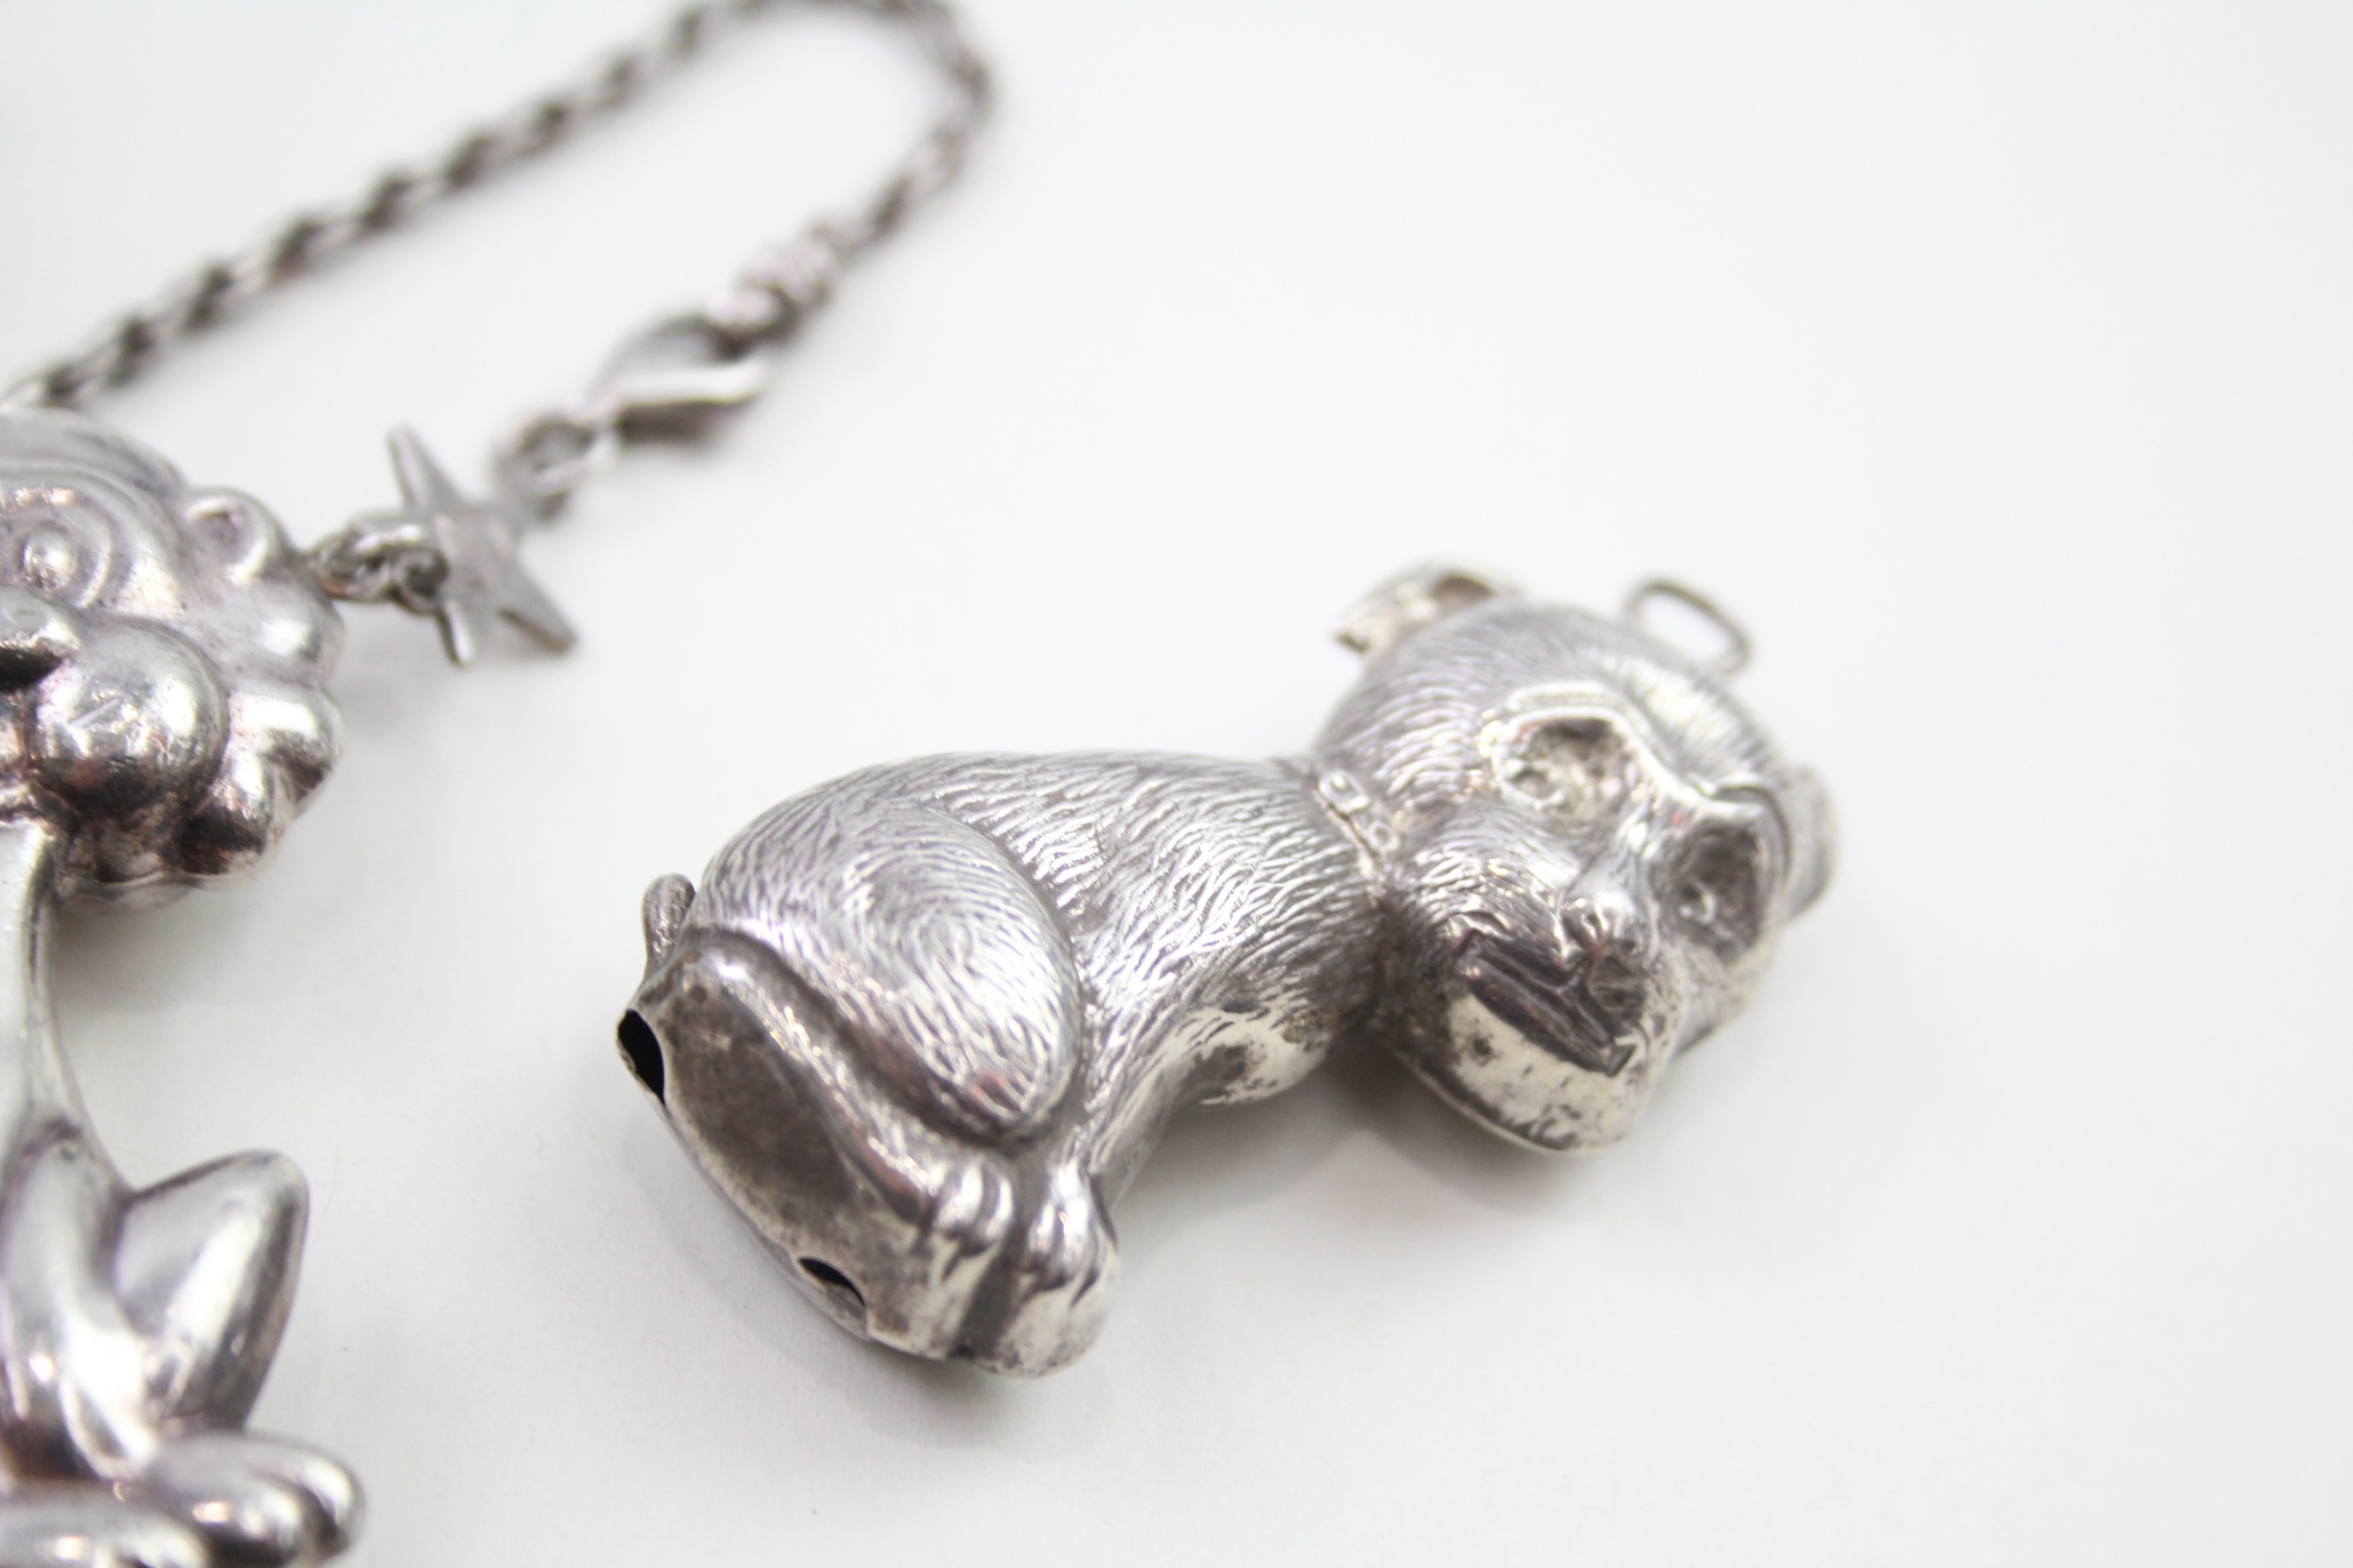 4 x .925 sterling silver baby rattles - Image 8 of 8